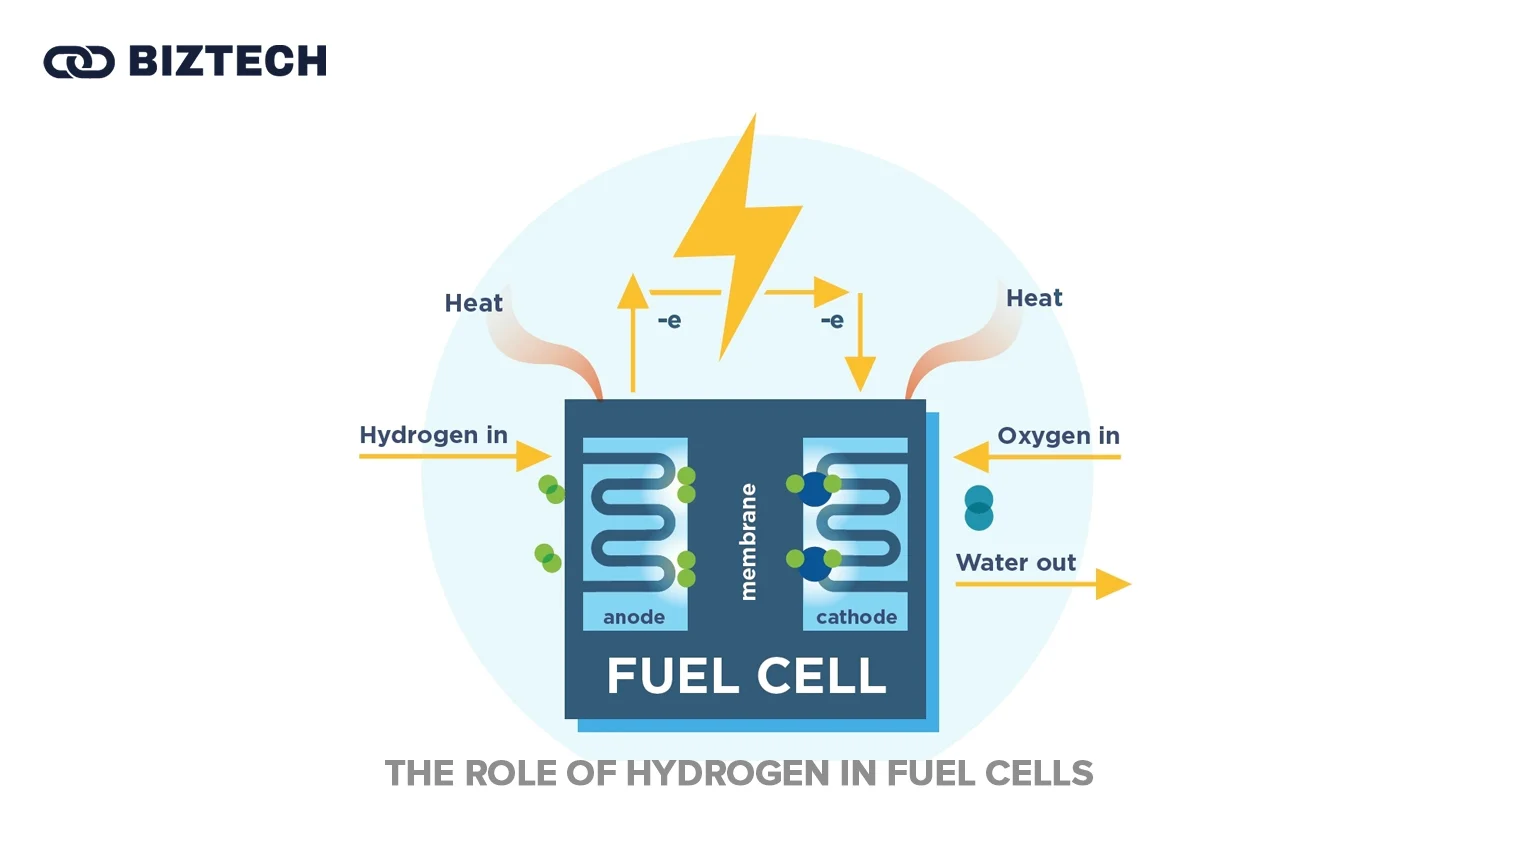 The role of hydrogen in fuel cells